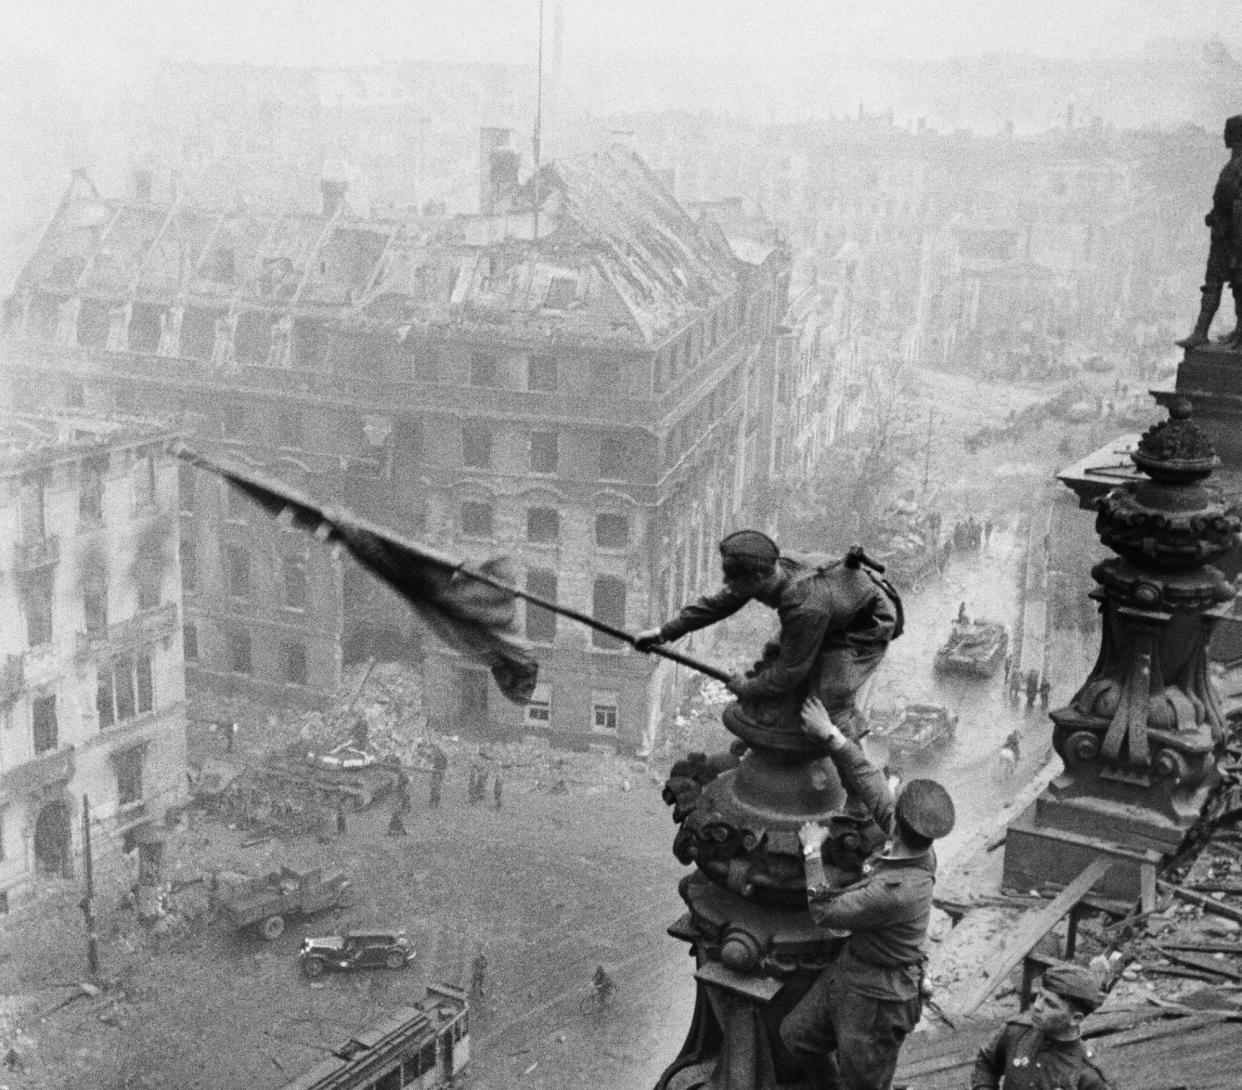 <span>Yevgeny Khaldei’s original image of the Soviet flag being raised over the Reichstag, Berlin, 1945, above, was later amended to obscure the officer wearing a watch on both wrists.</span><span>Photograph: Sovfoto/Universal Images Group/Shutterstock</span>